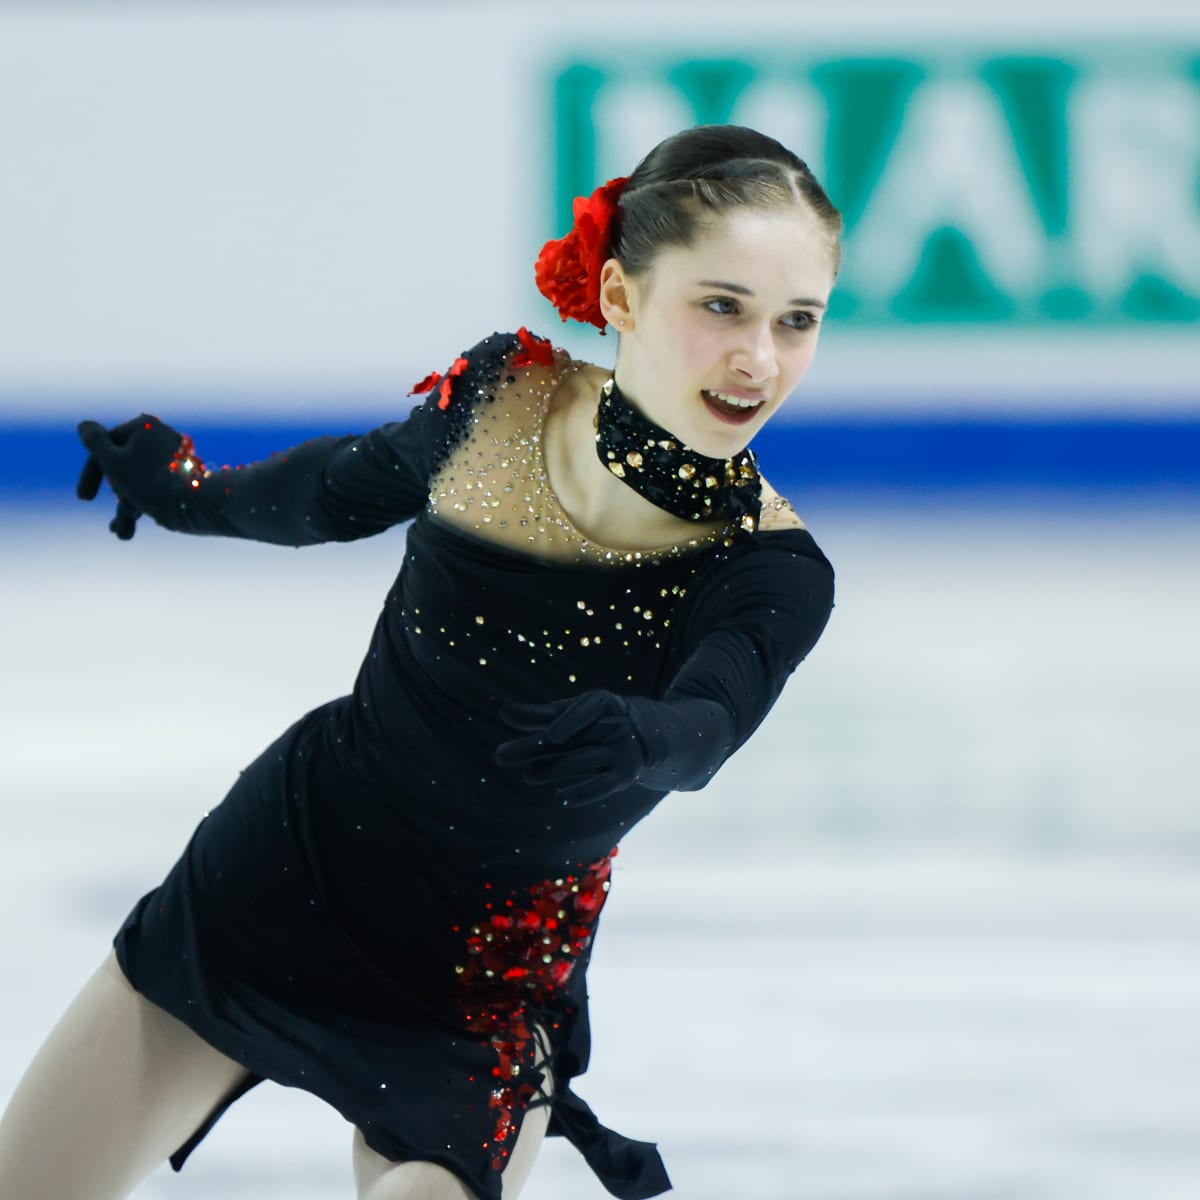 Watch World Championships, Womens Short Stream Figure Skating - How to Watch and Stream Major League and College Sports